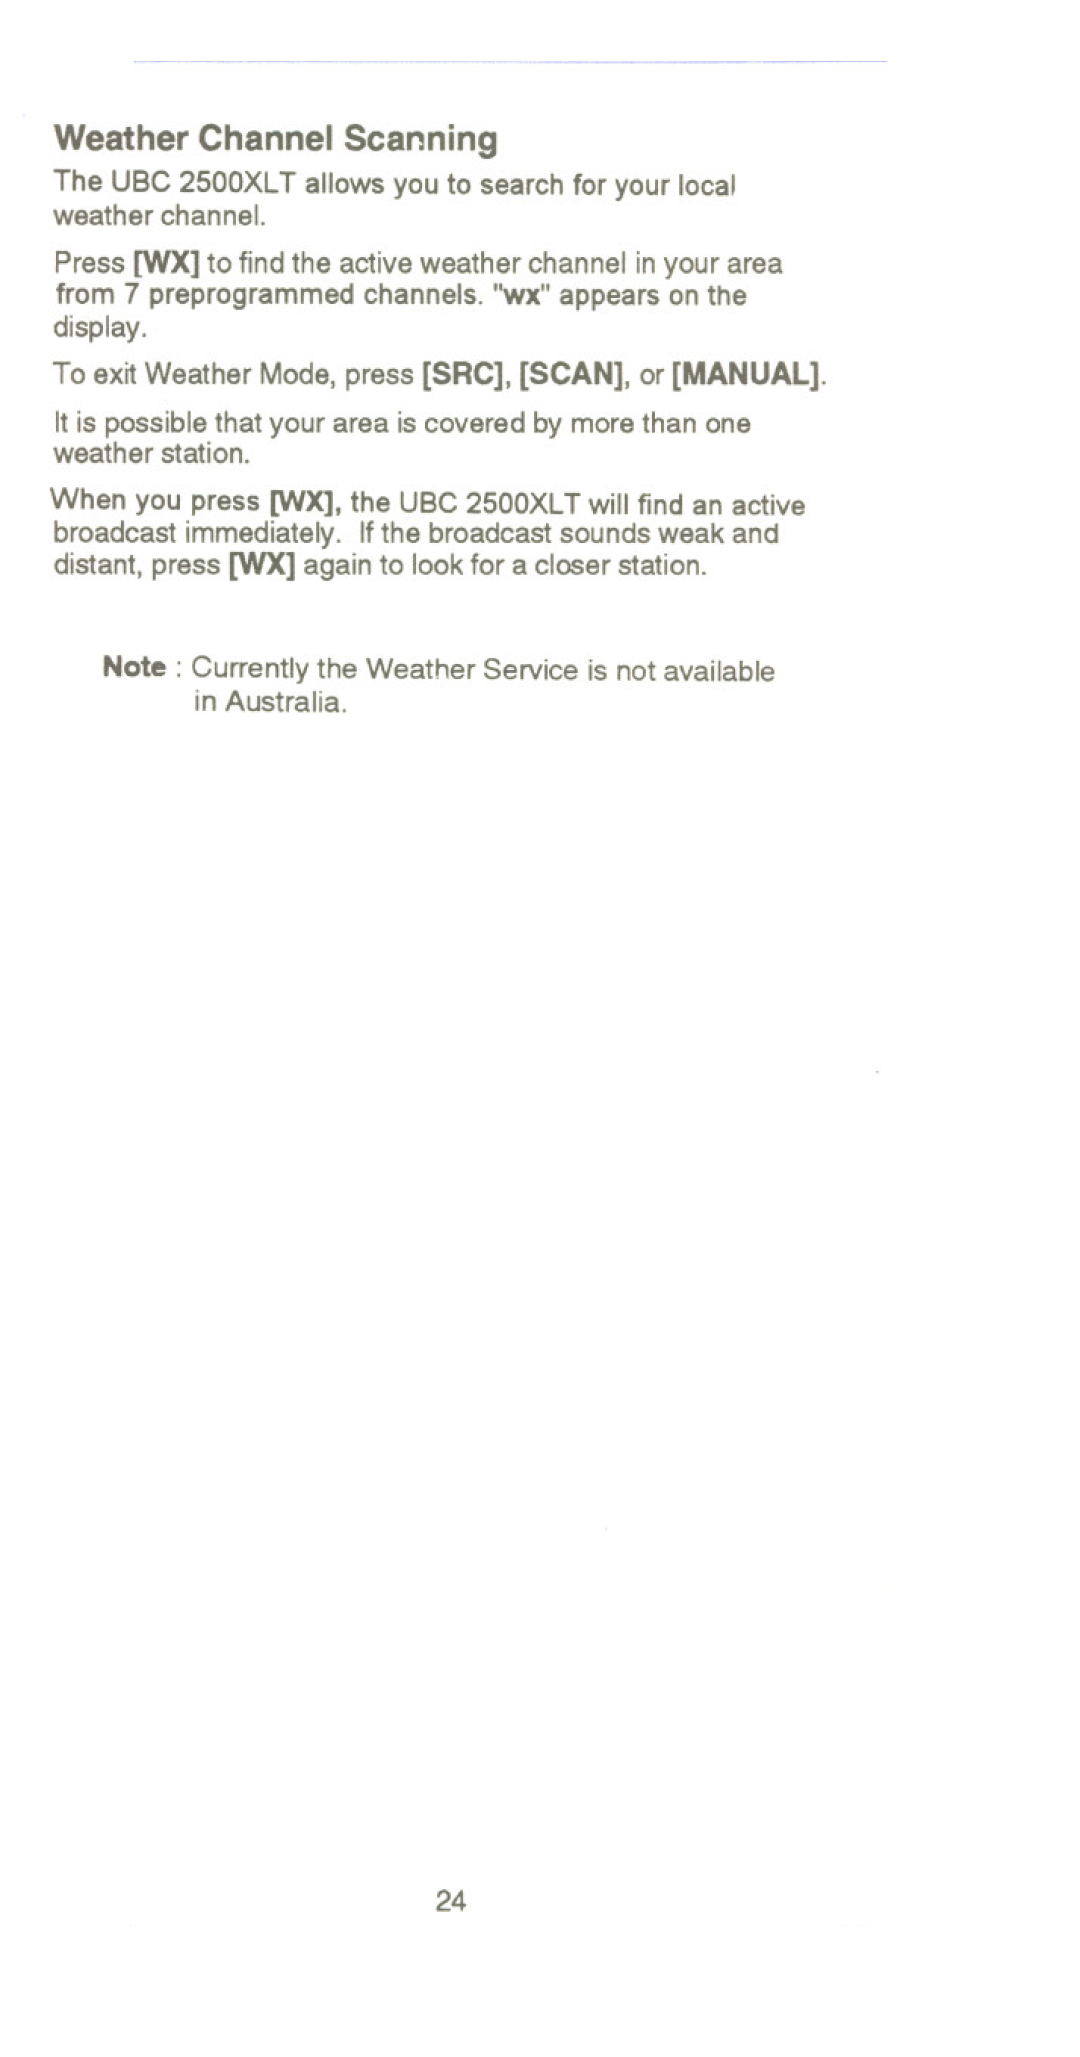 Uniden UBC 2500XLT manual Weather Channel Scanning, Note Currently the Weather Service is not available in Australia 